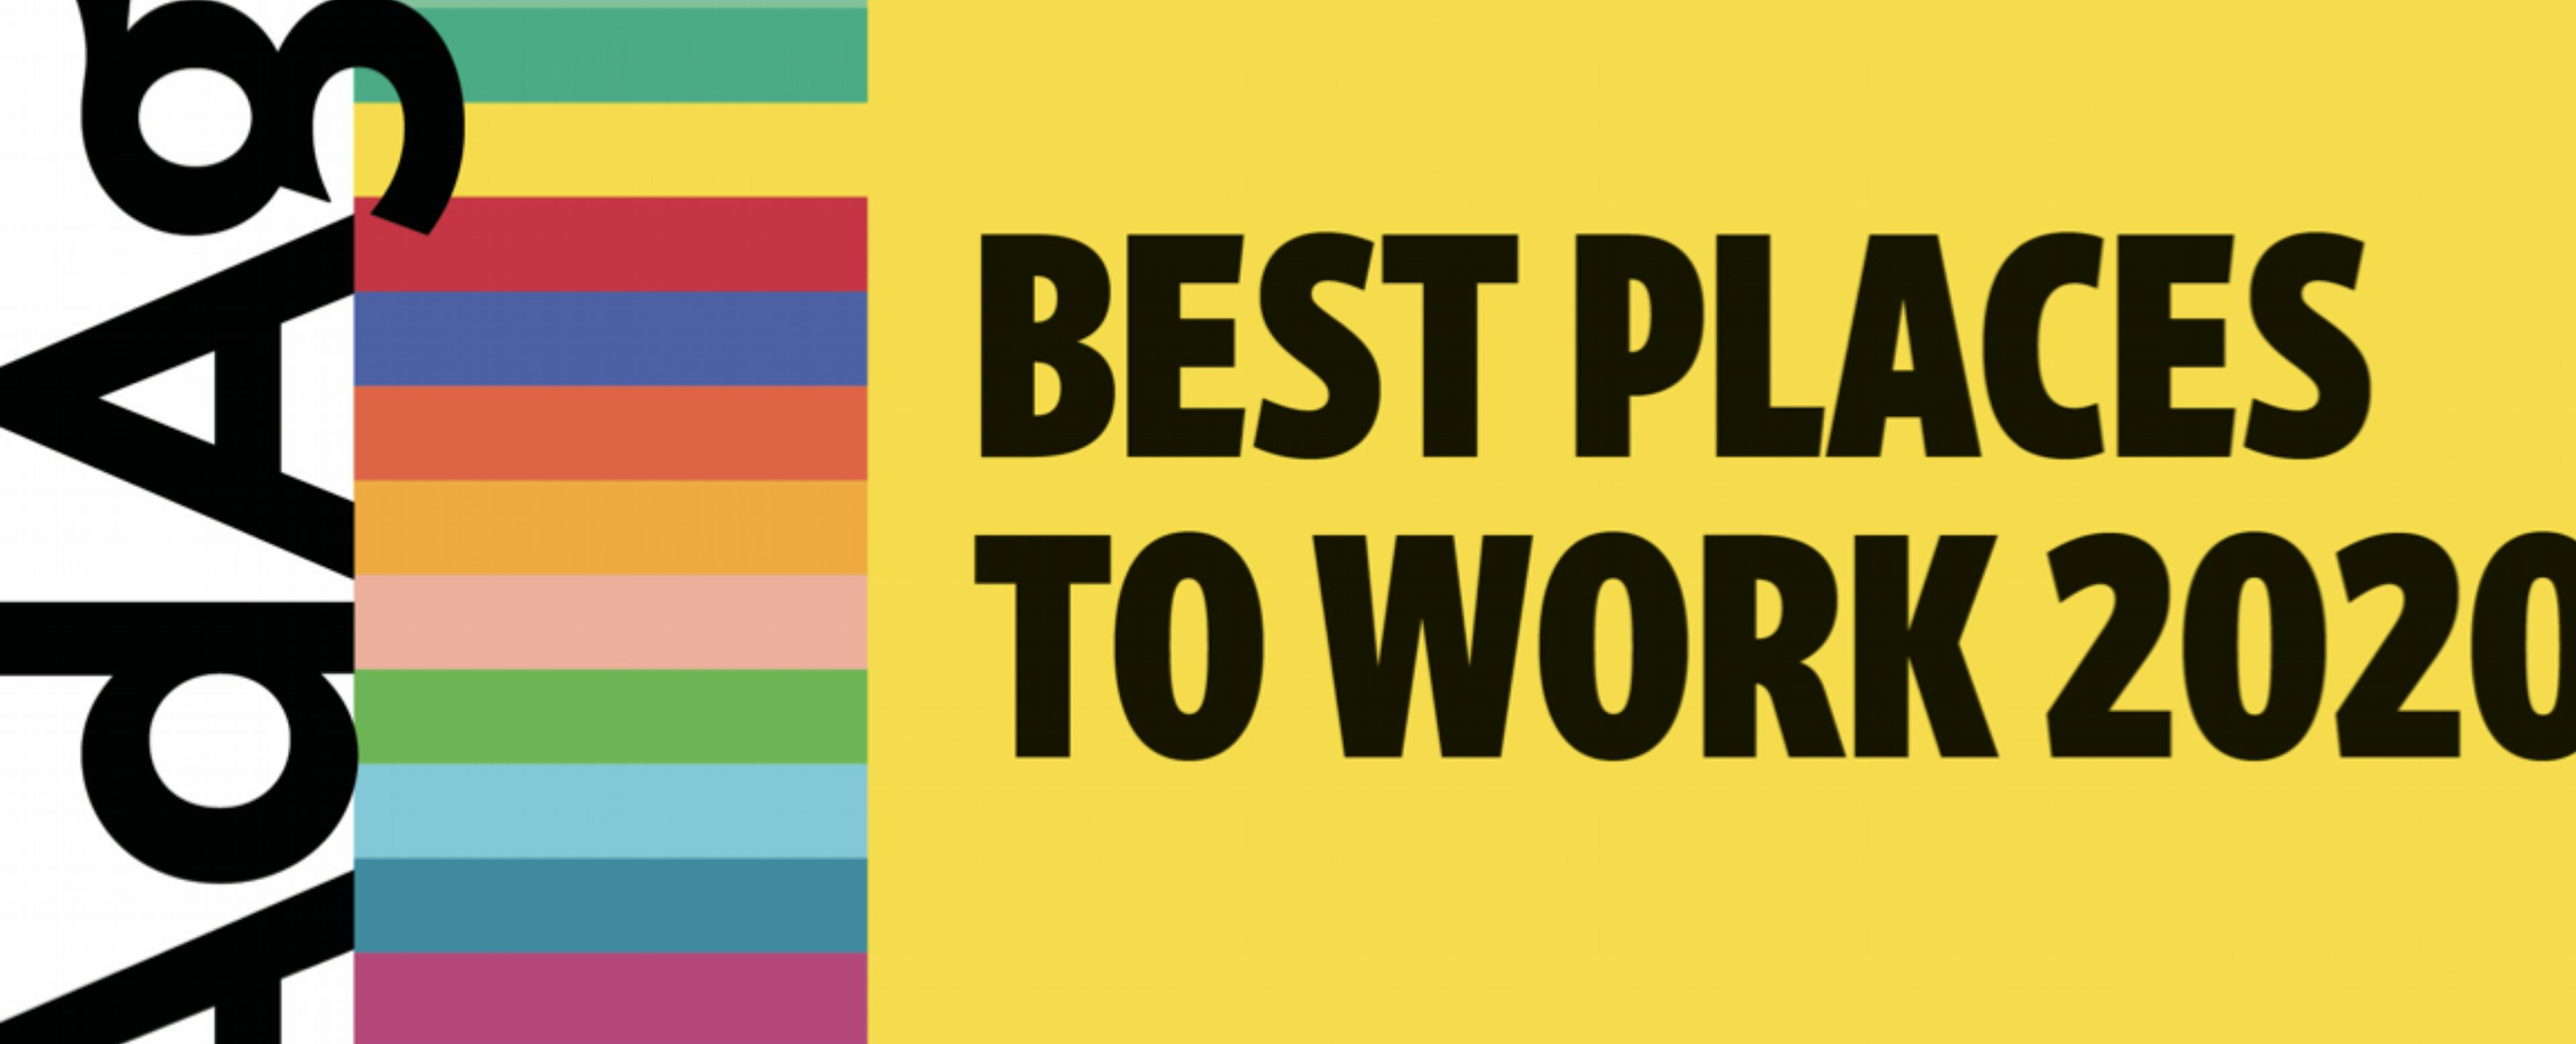 RBA (now The Uptown Agency) Best Places to Work 2020